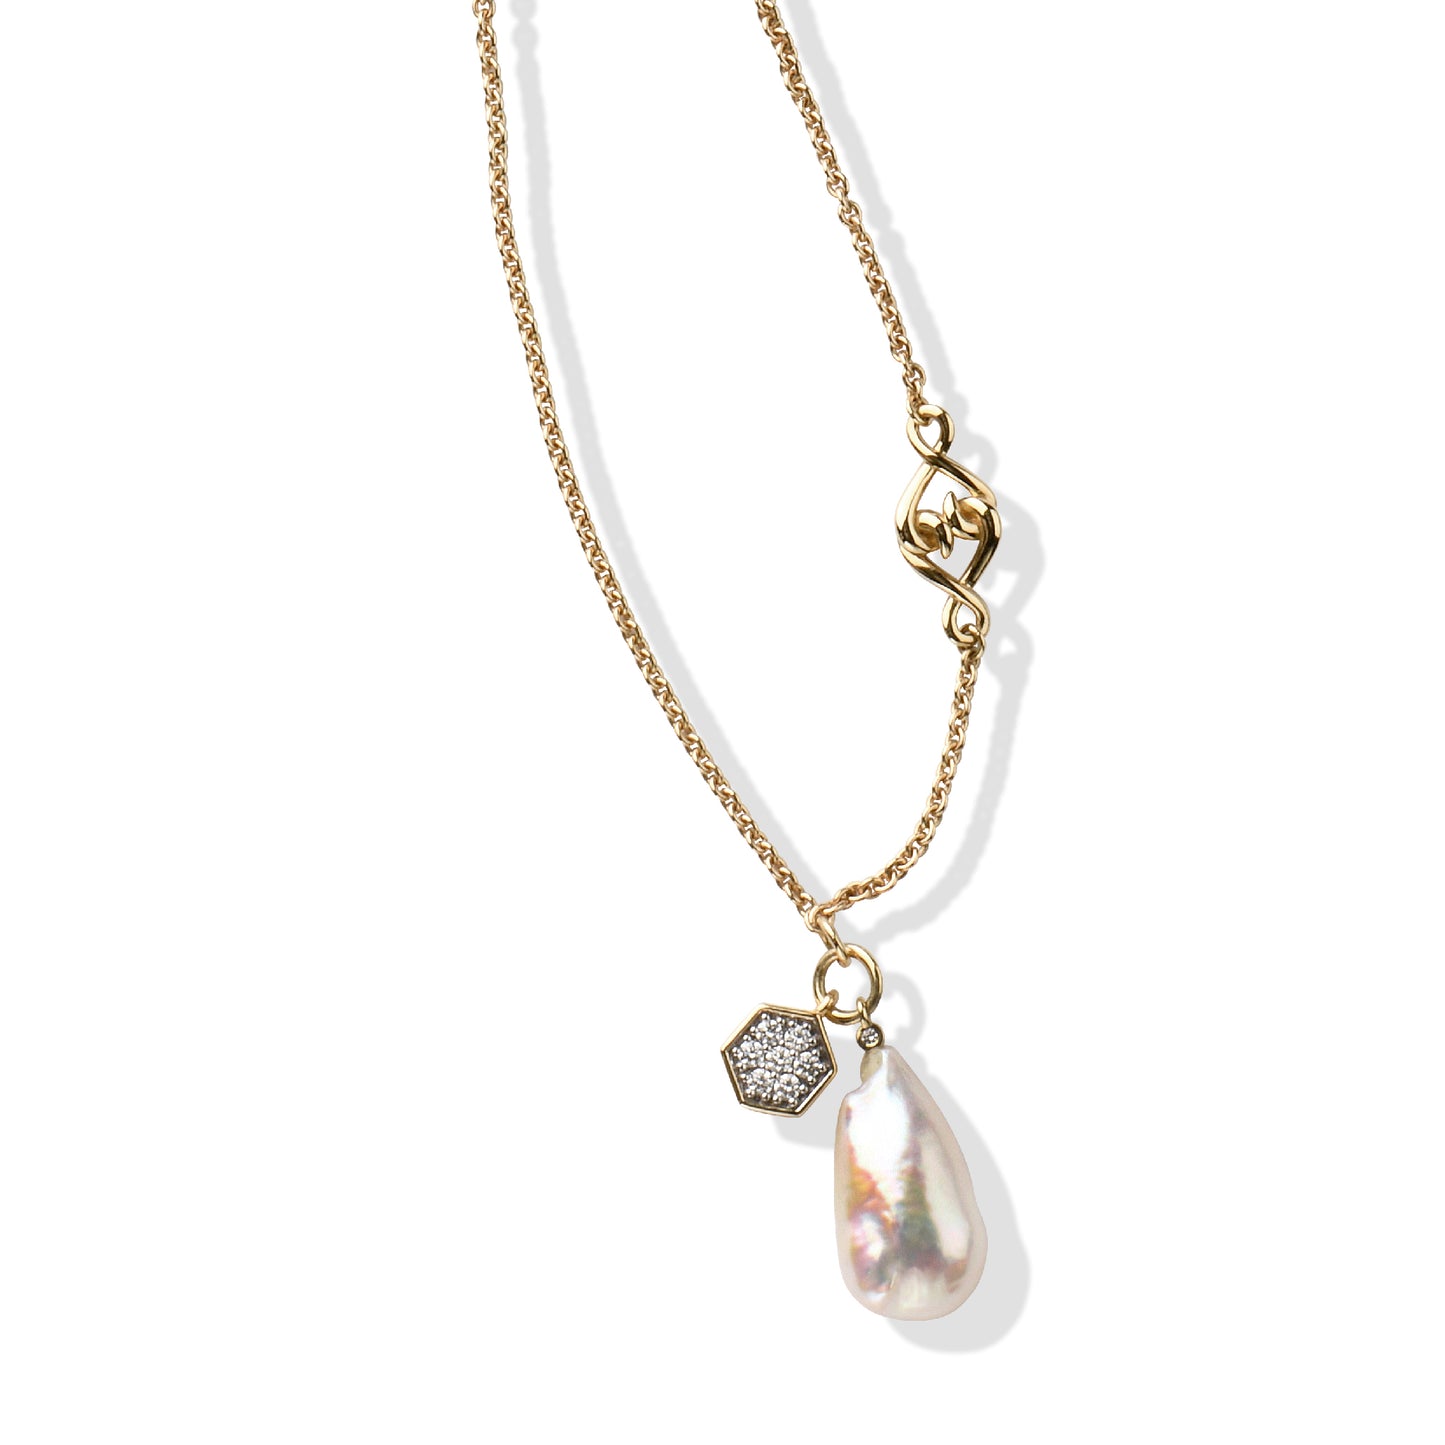 Gold Pearl Necklace | 19.5" Pearl Diamond Necklace with Yellow Gold Chain